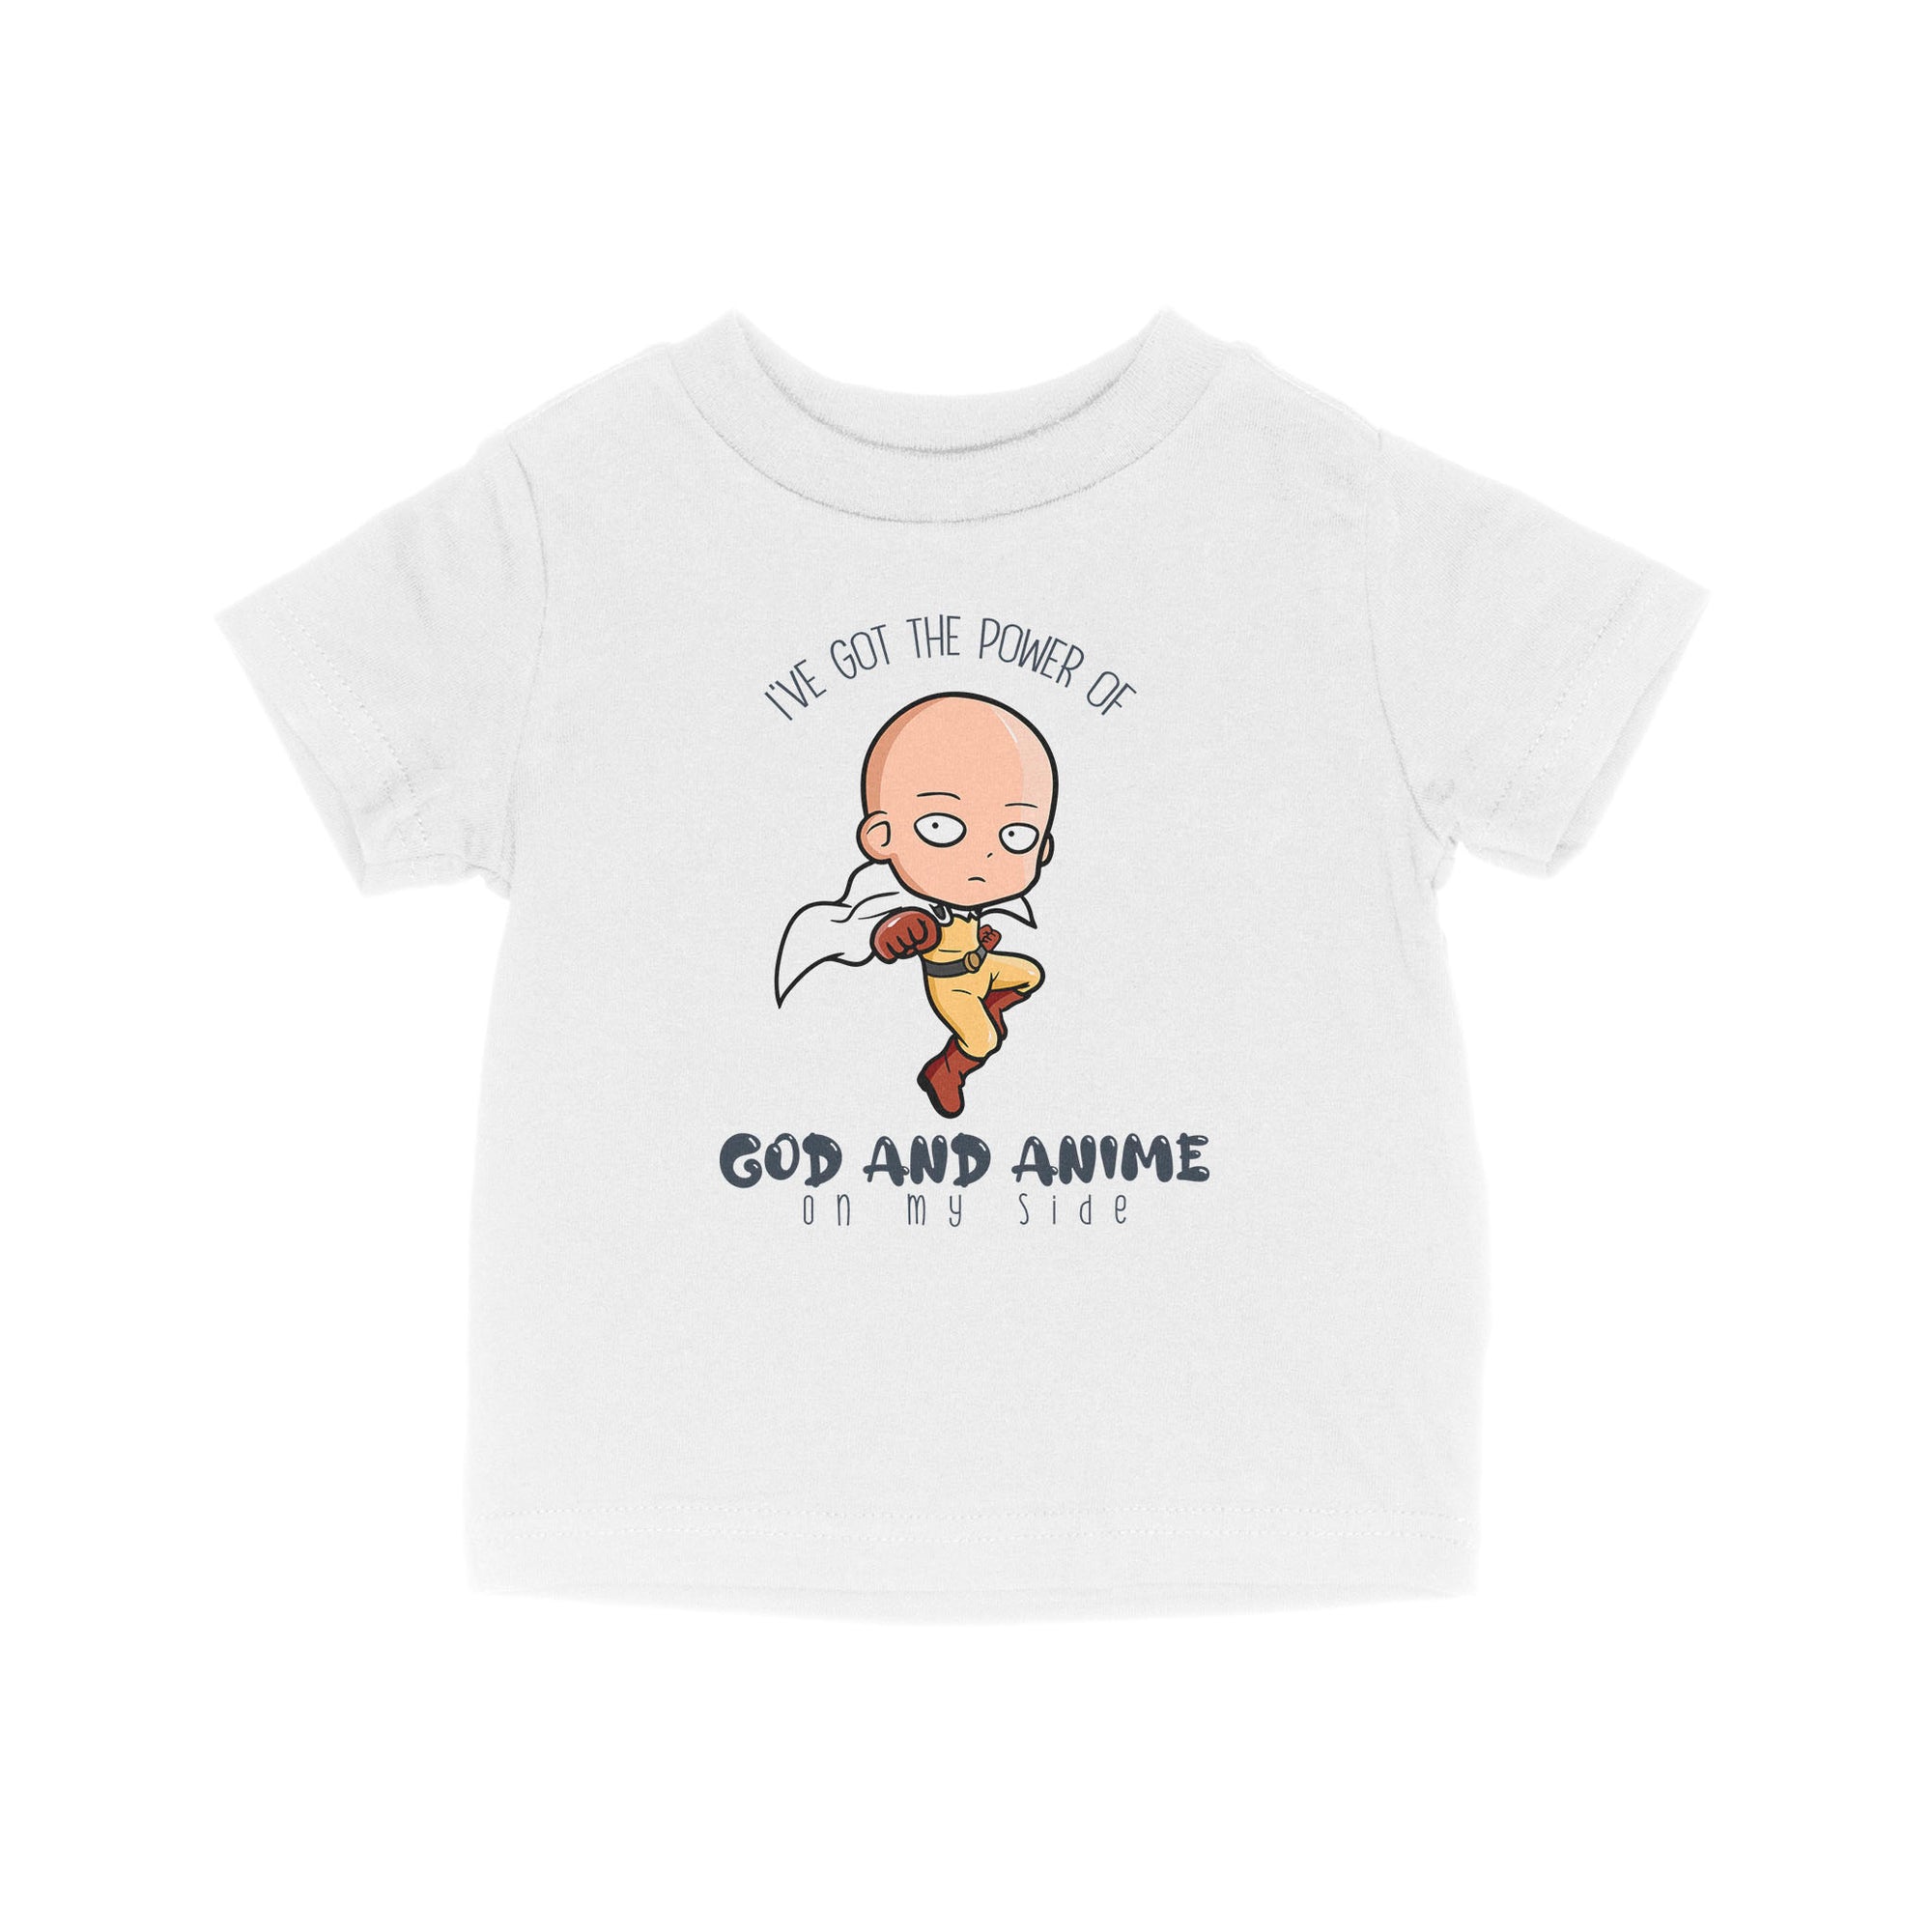 I Have The Power Of God And Anime On My Side - Baby T-Shirt